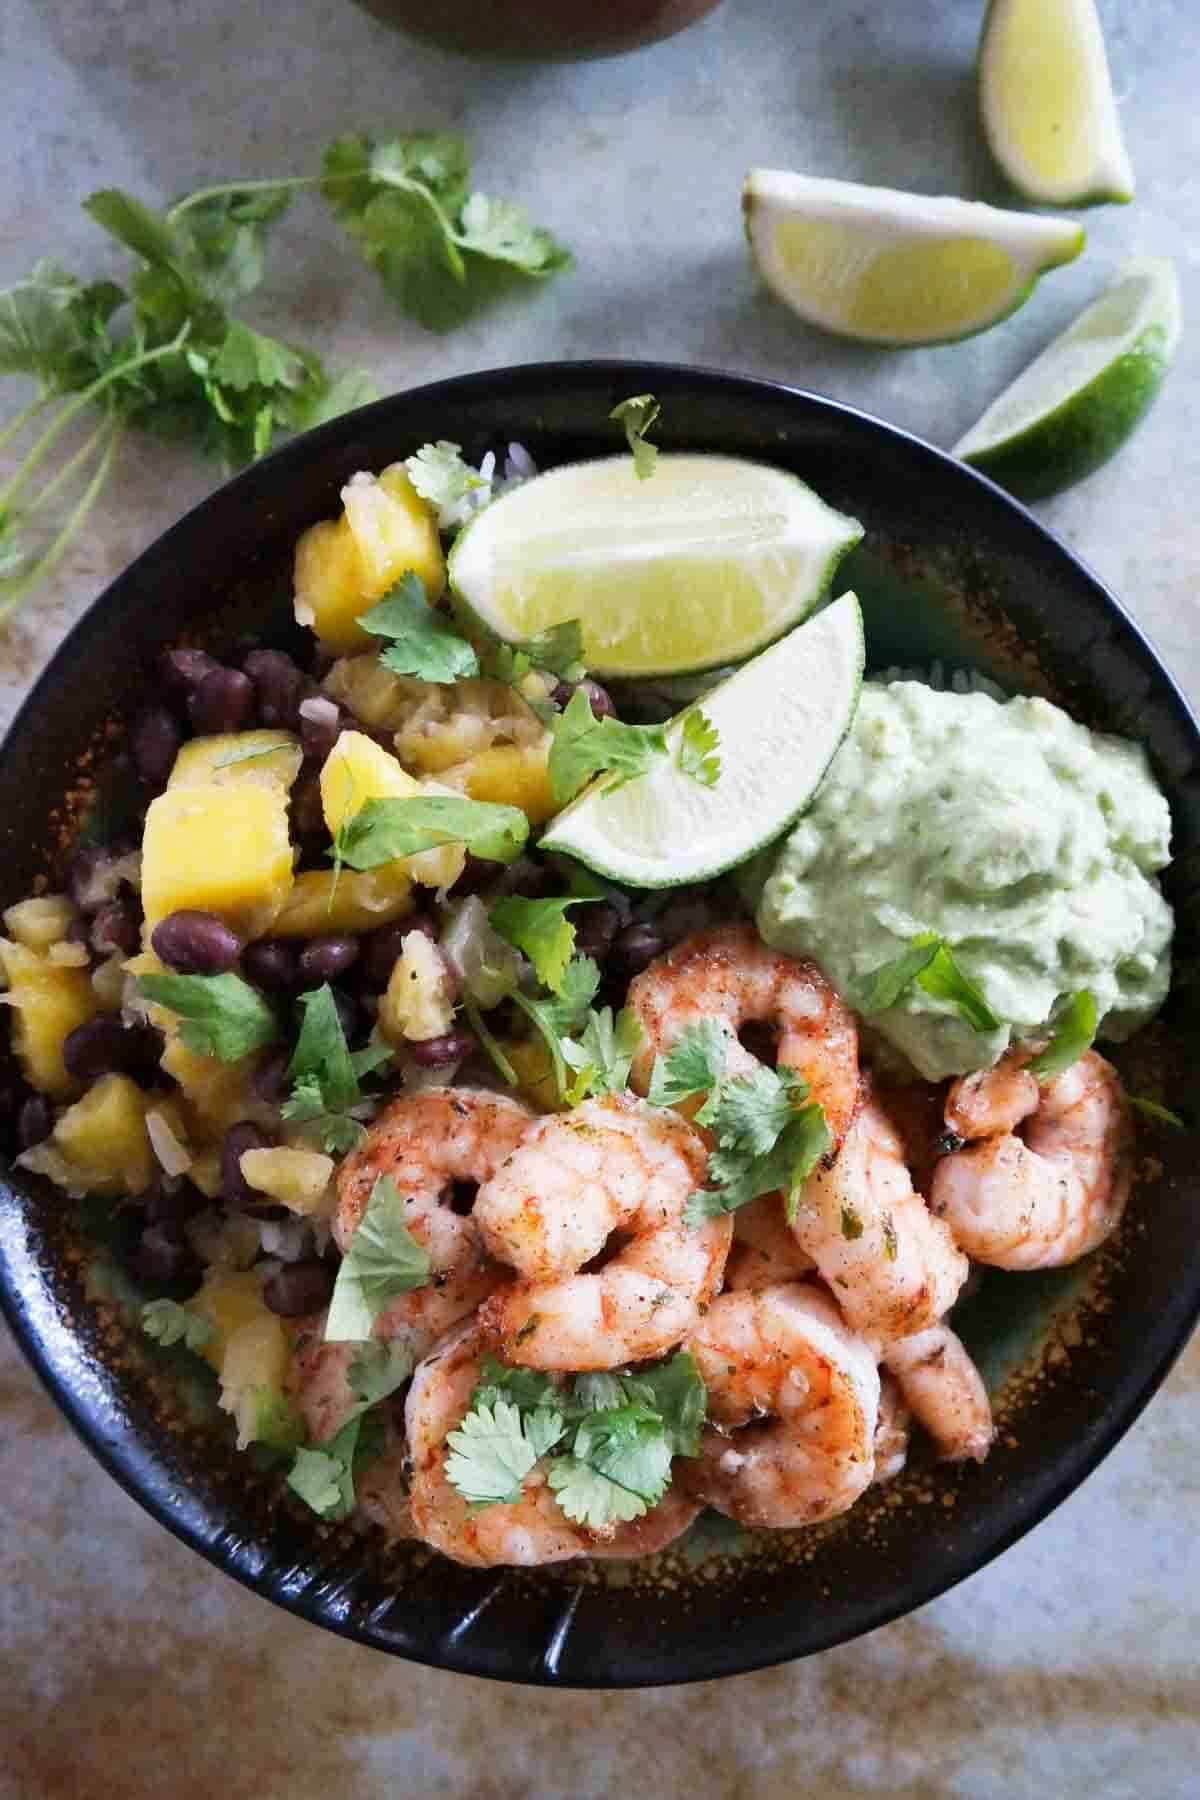 Spicy Shrimp Bowls - coconut rice topped with shrimp, beans, mango, pineapple, and mashed avocado.